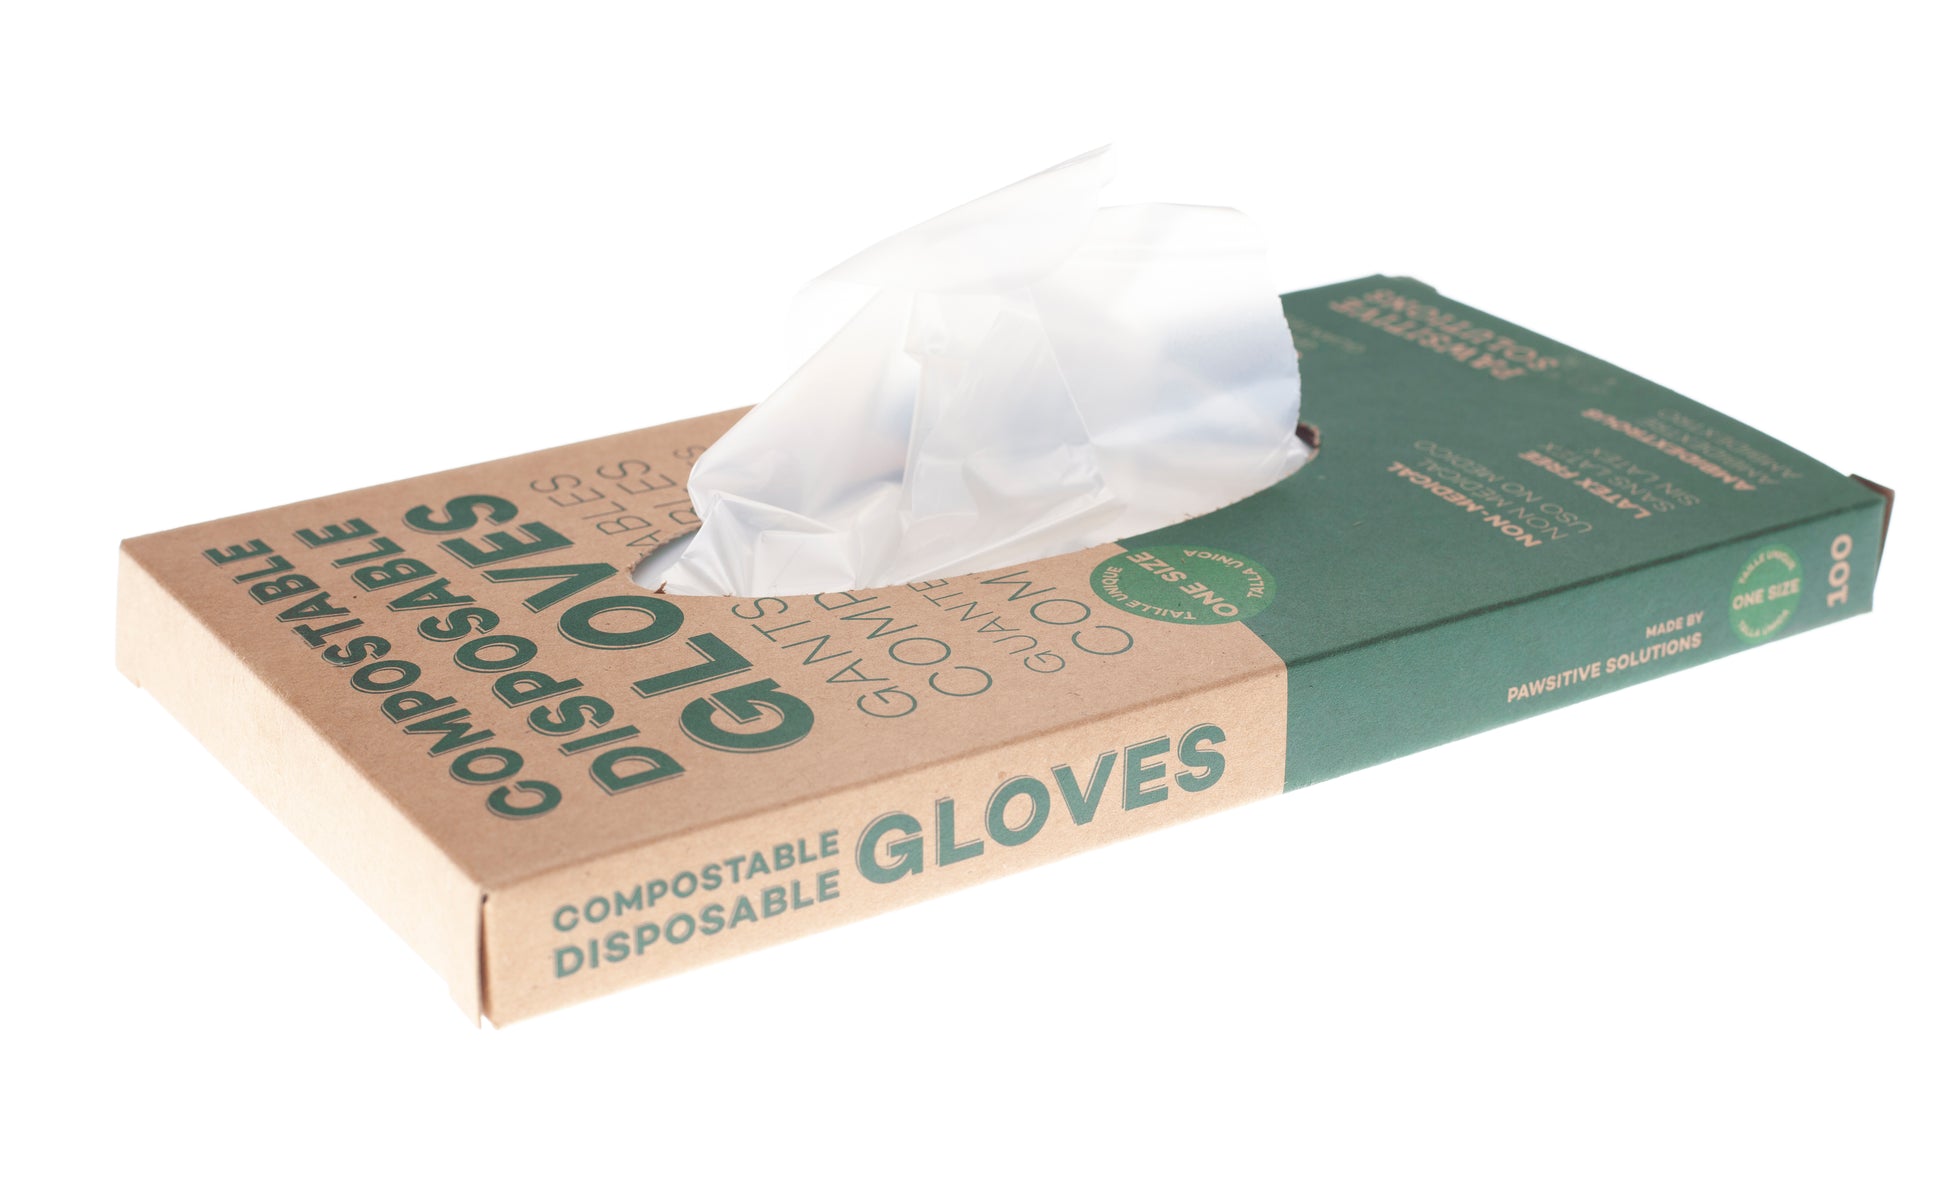 Compostable Disposable Gloves BPI certified for green bin use. Free shipping. PPE equipment food safe disposable gloves for your hands.